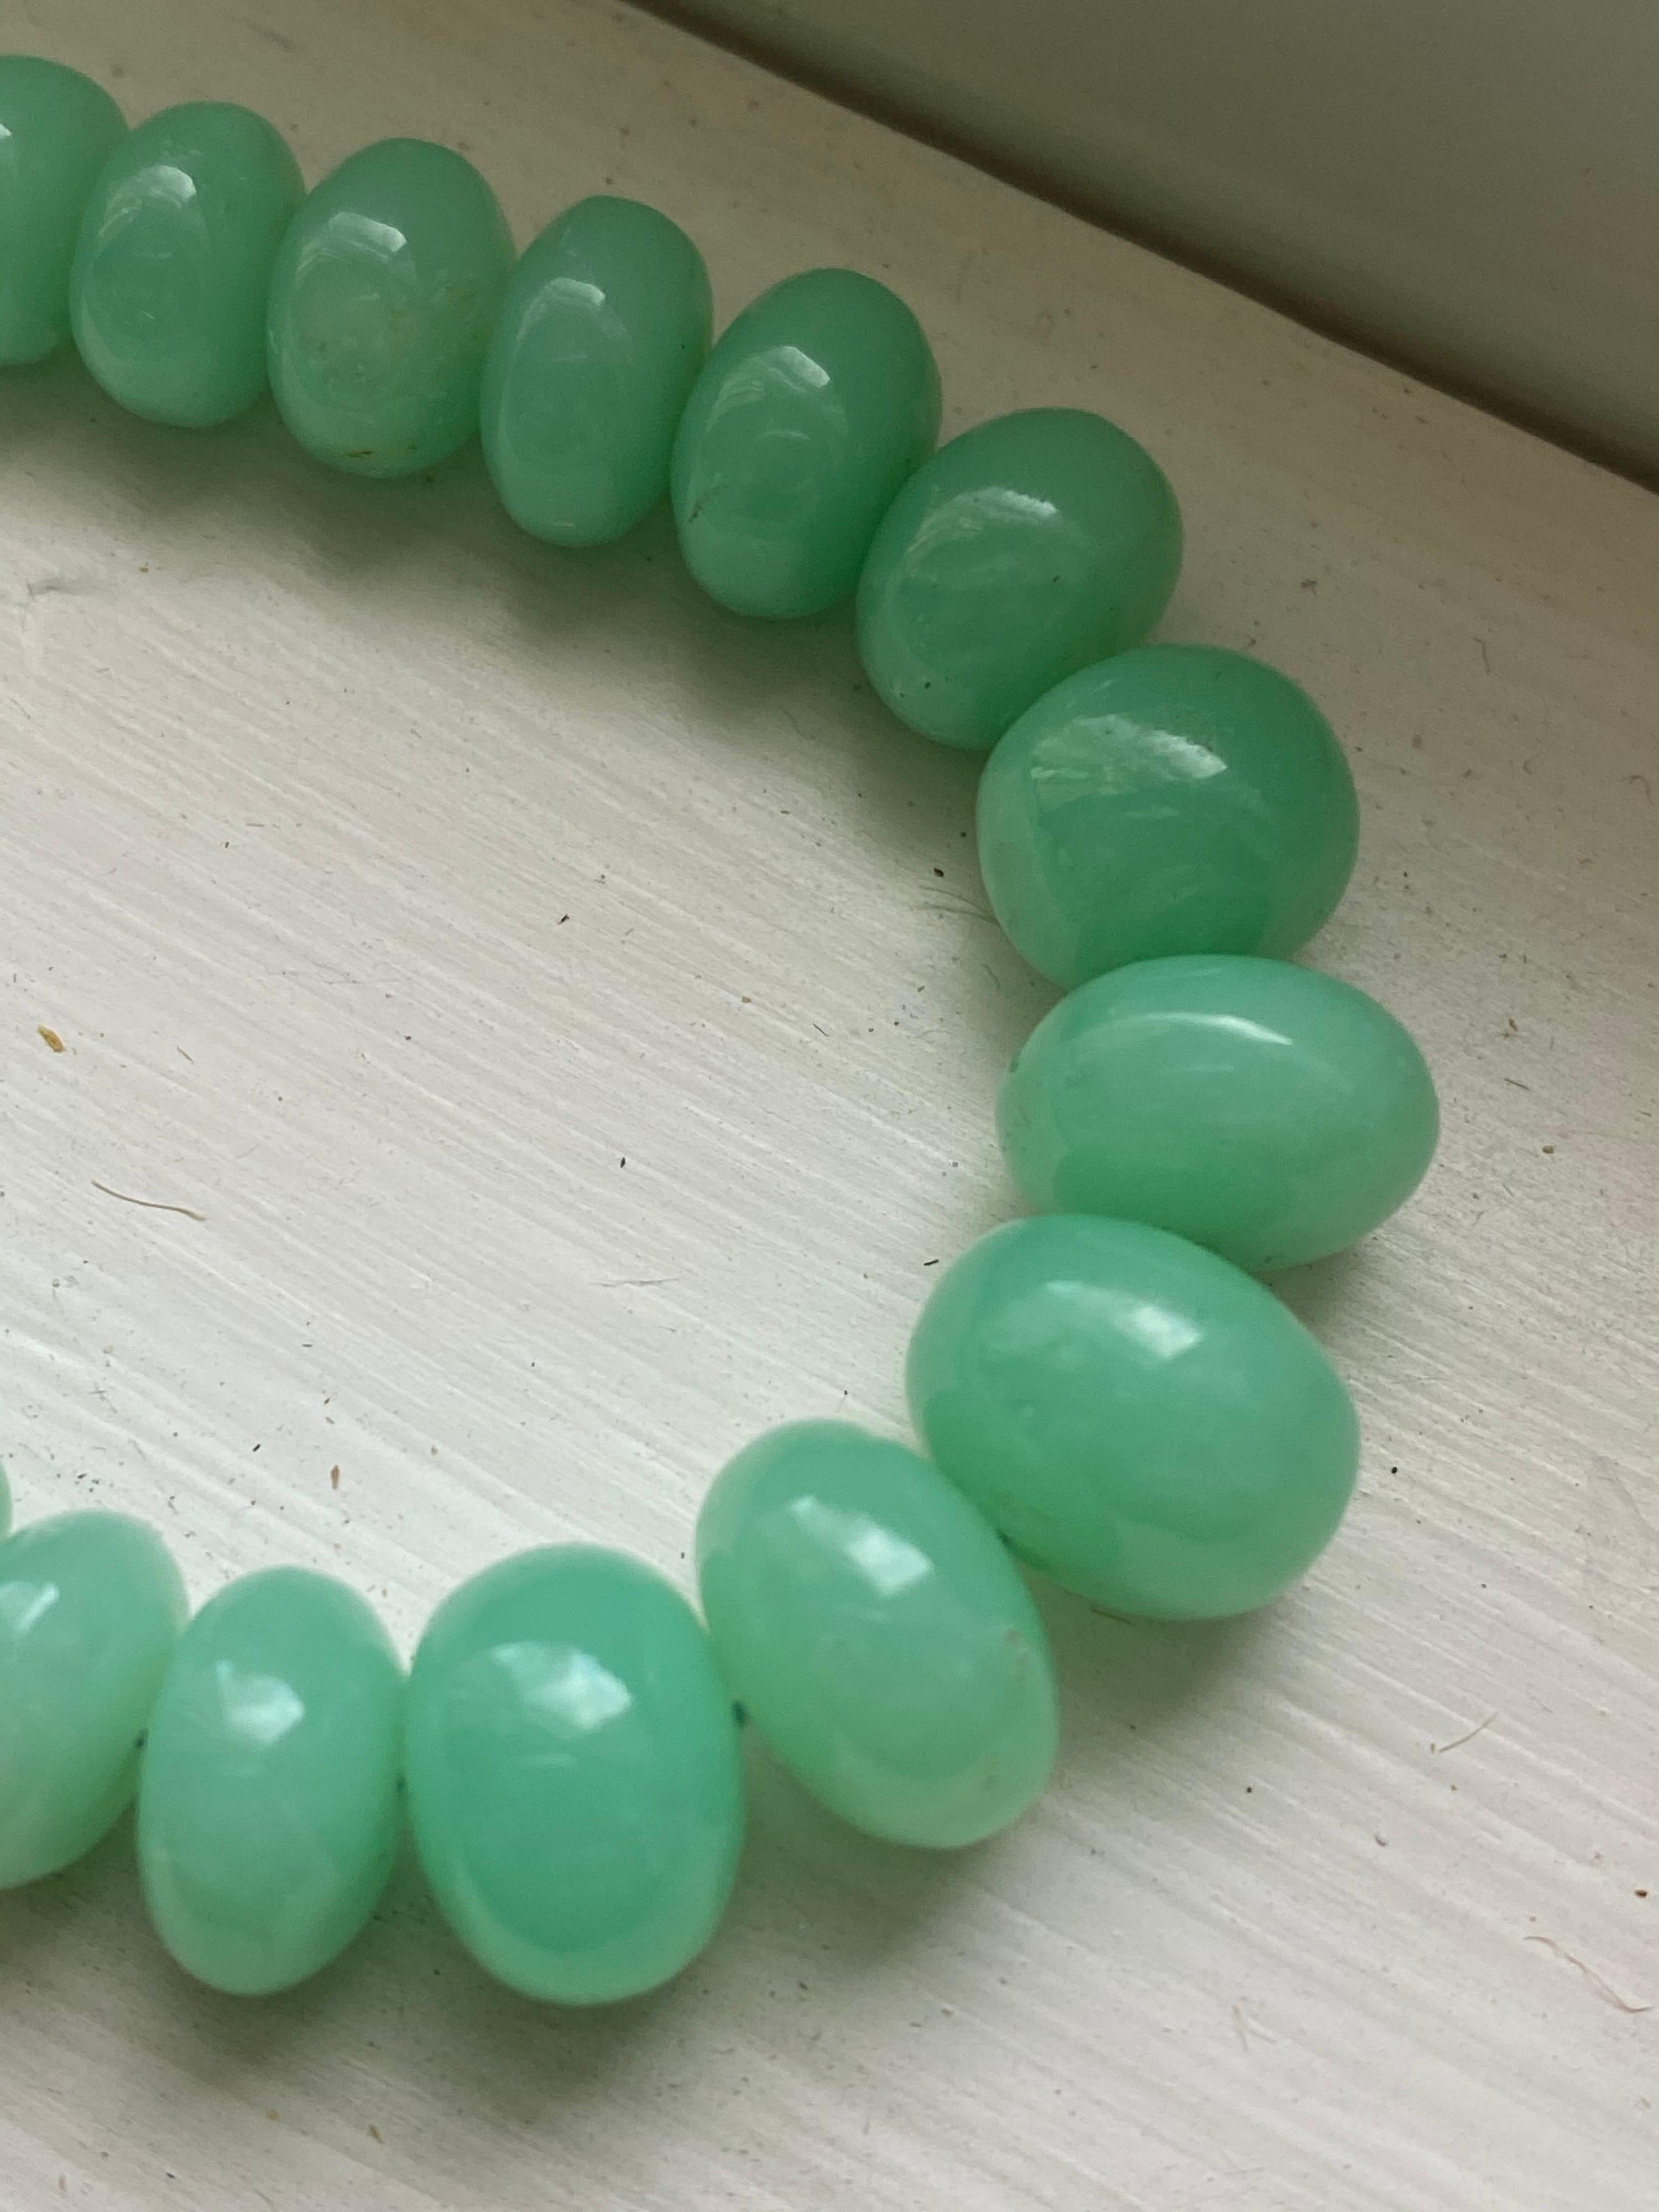 Green Apple Chrysoprase Necklace with a Green Amethyst Sterling Silver Clasp In Excellent Condition For Sale In New York, NY